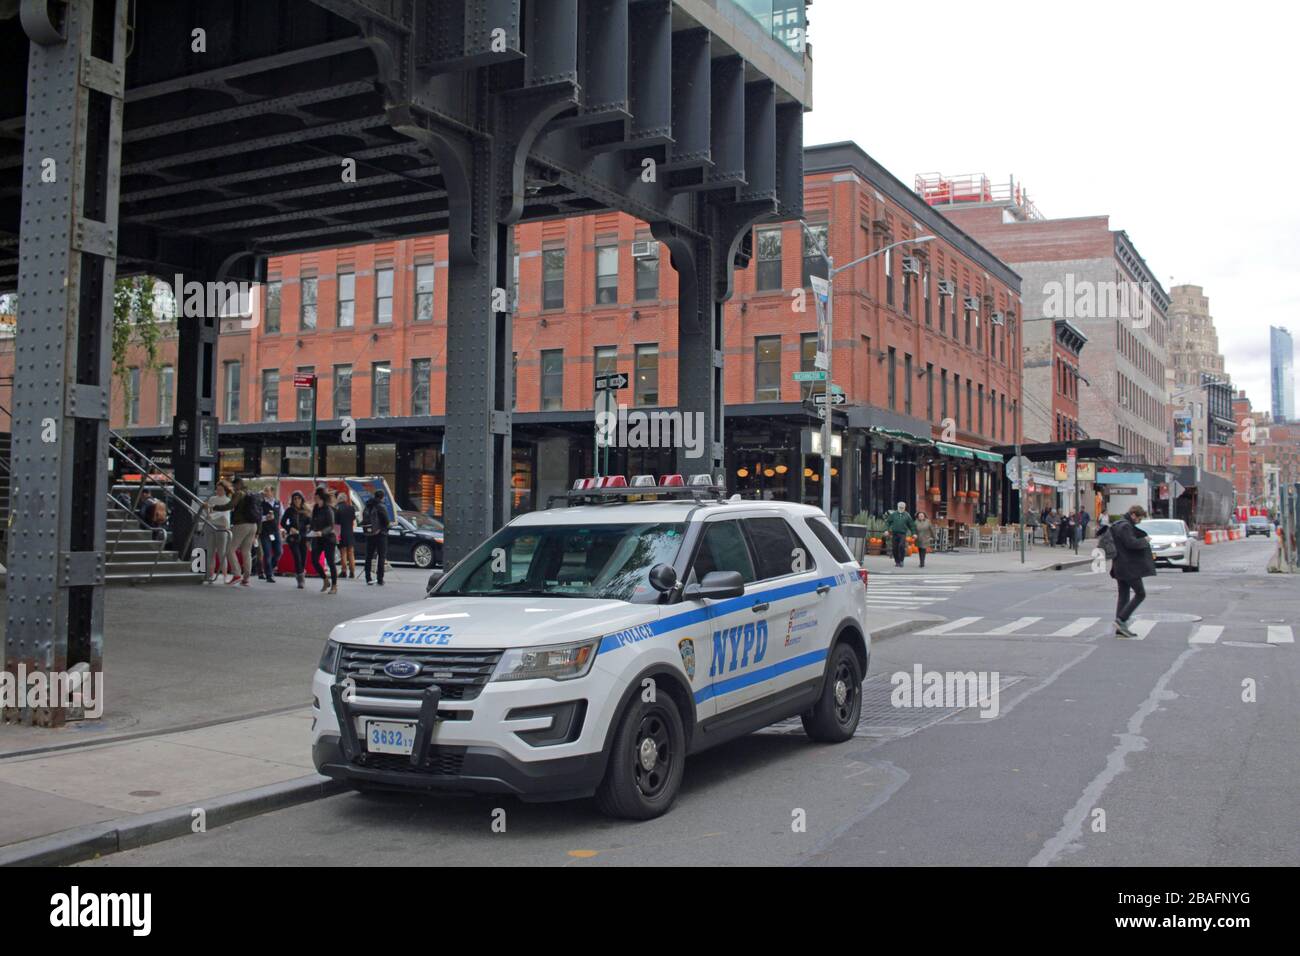 NYPD vehicle under the High Line, Meatpacking  District, New York City, USA Stock Photo